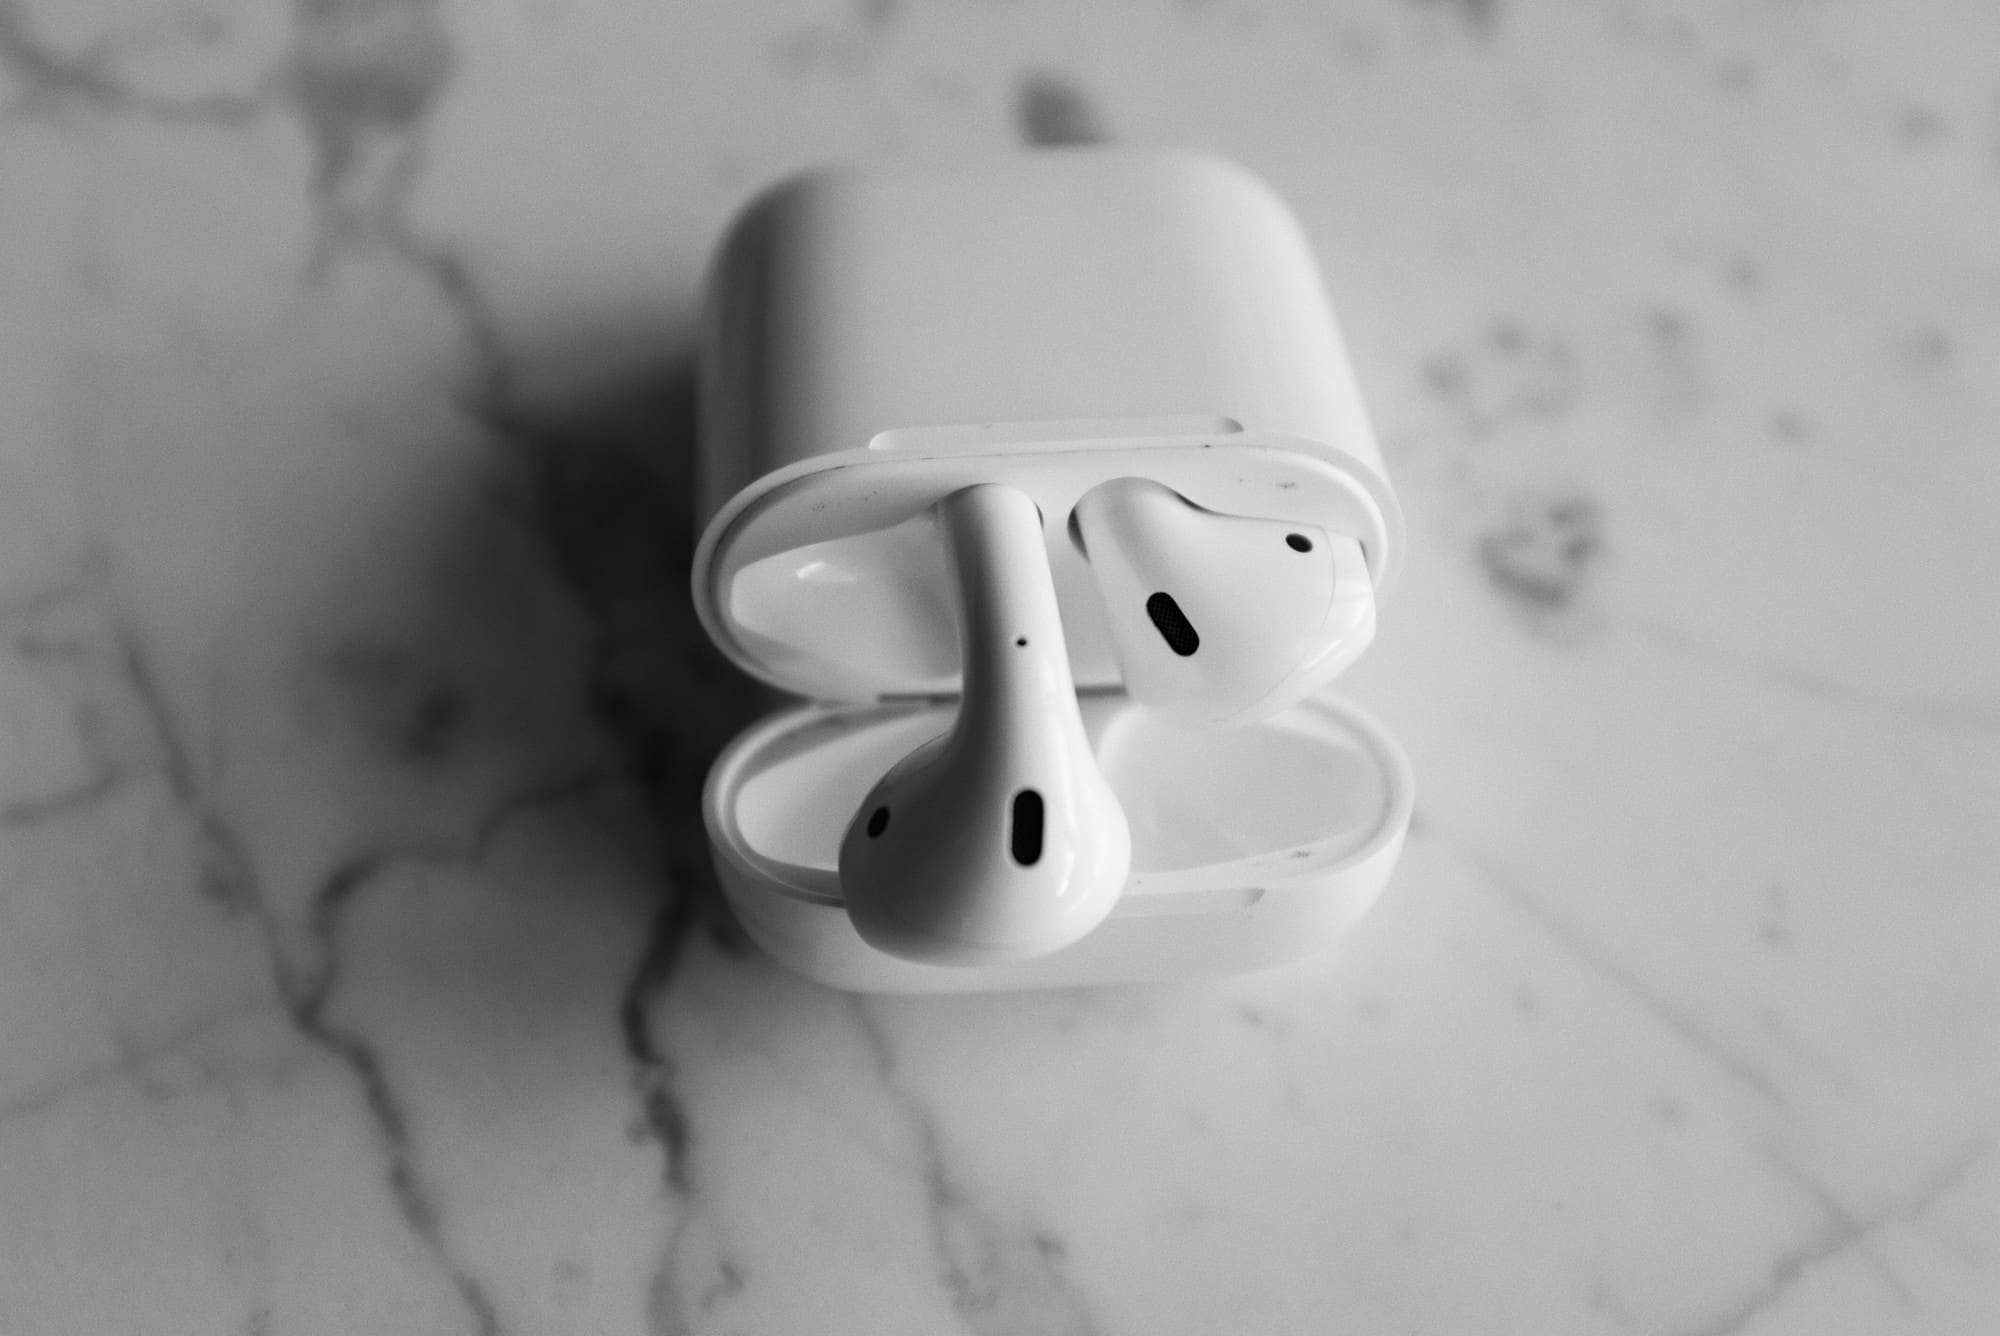 Samsung Galaxy Buds vs Airpods: Which Is Best?